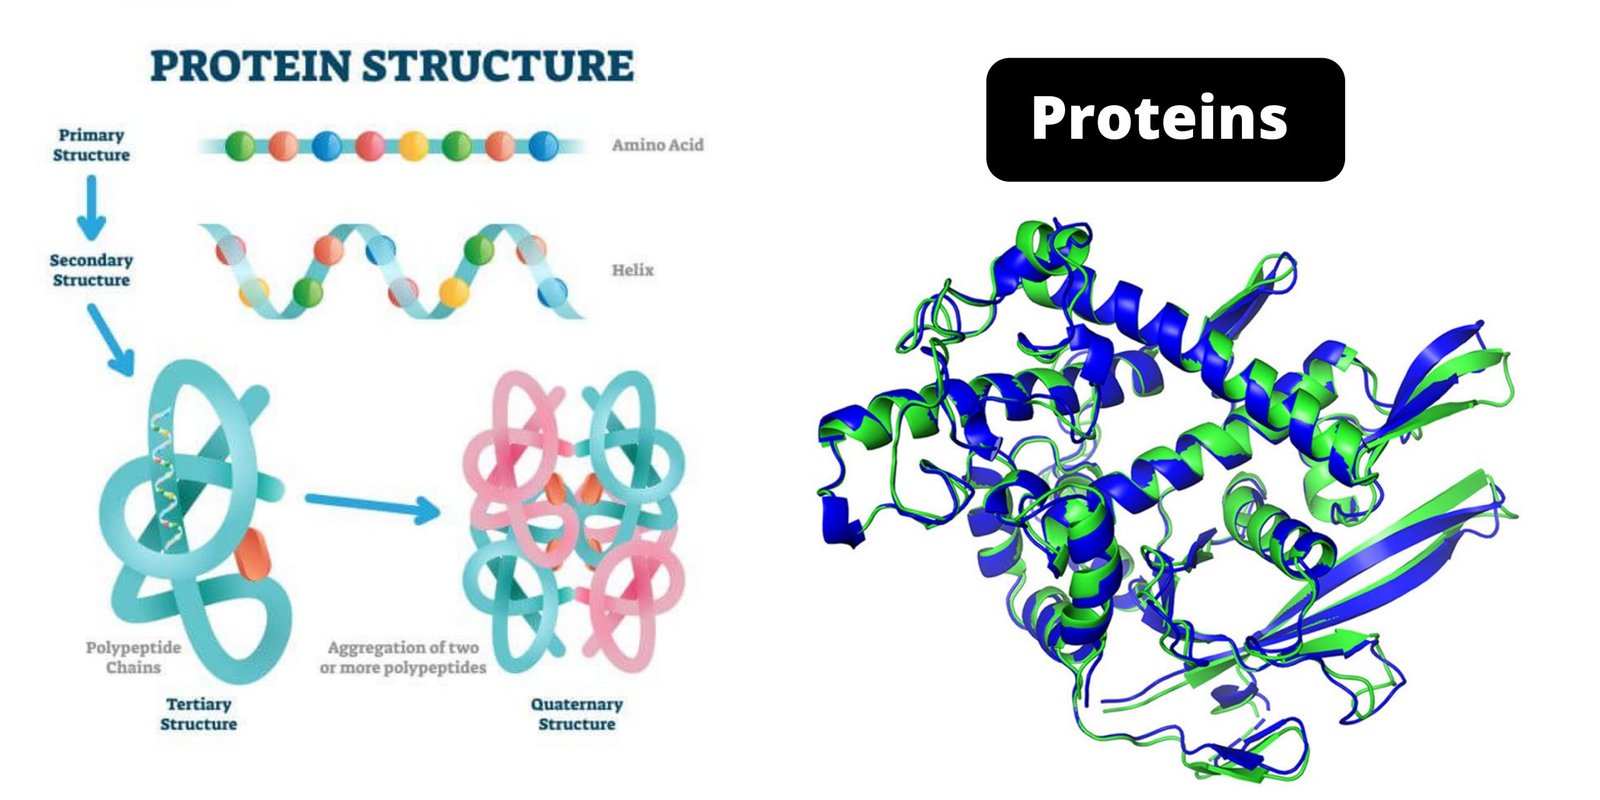 Proteins - Structure, Properties, Type, Denaturation, Functions